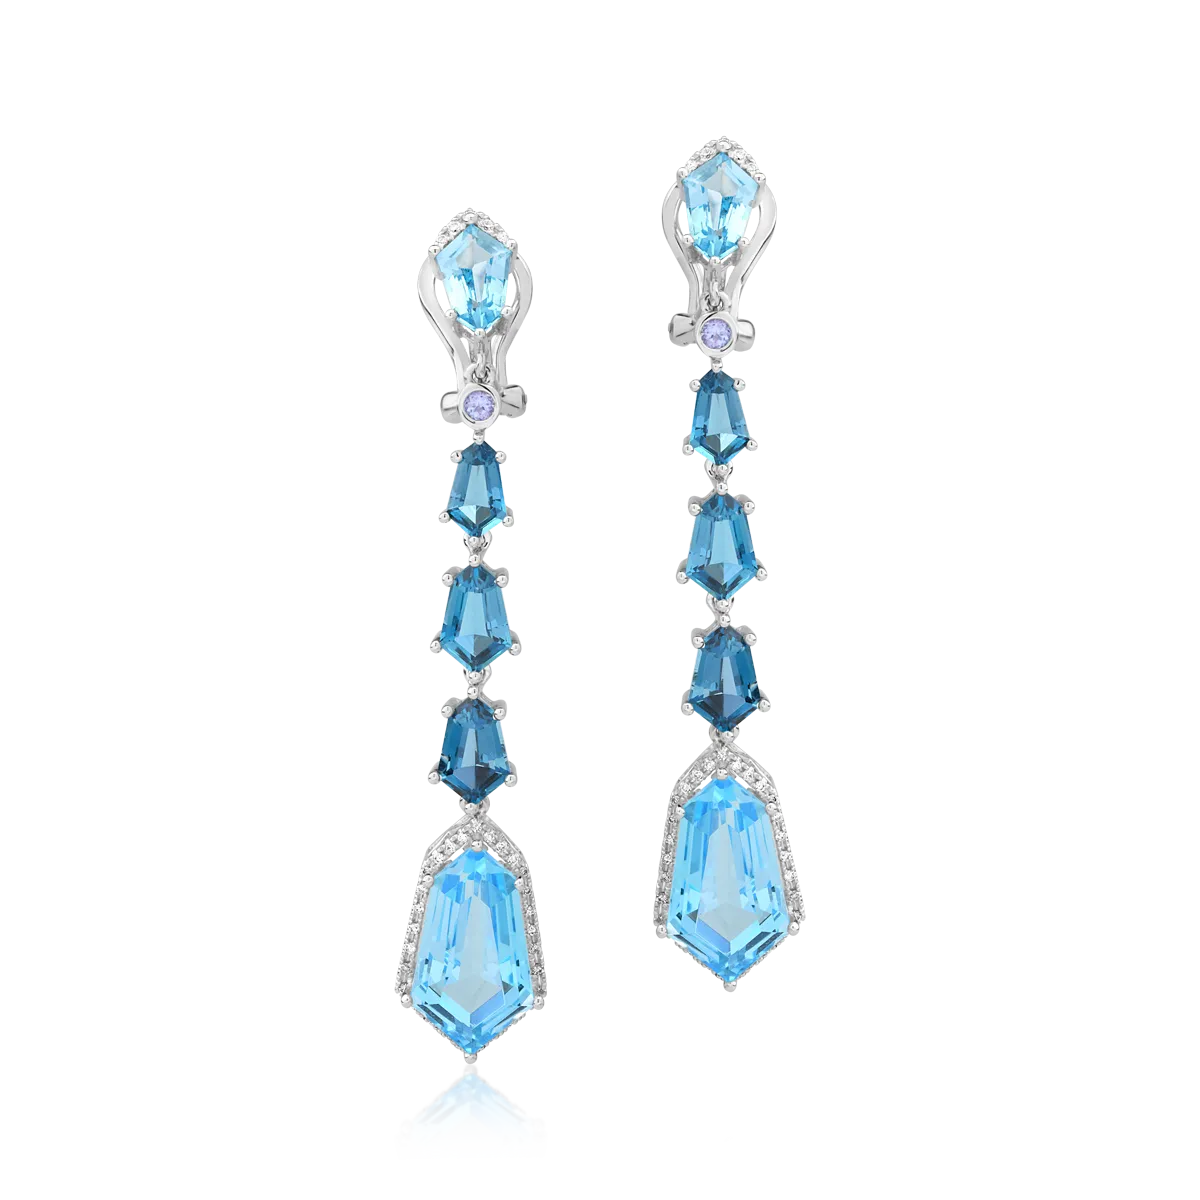 18K white gold earrings with 18.2ct blue topaz